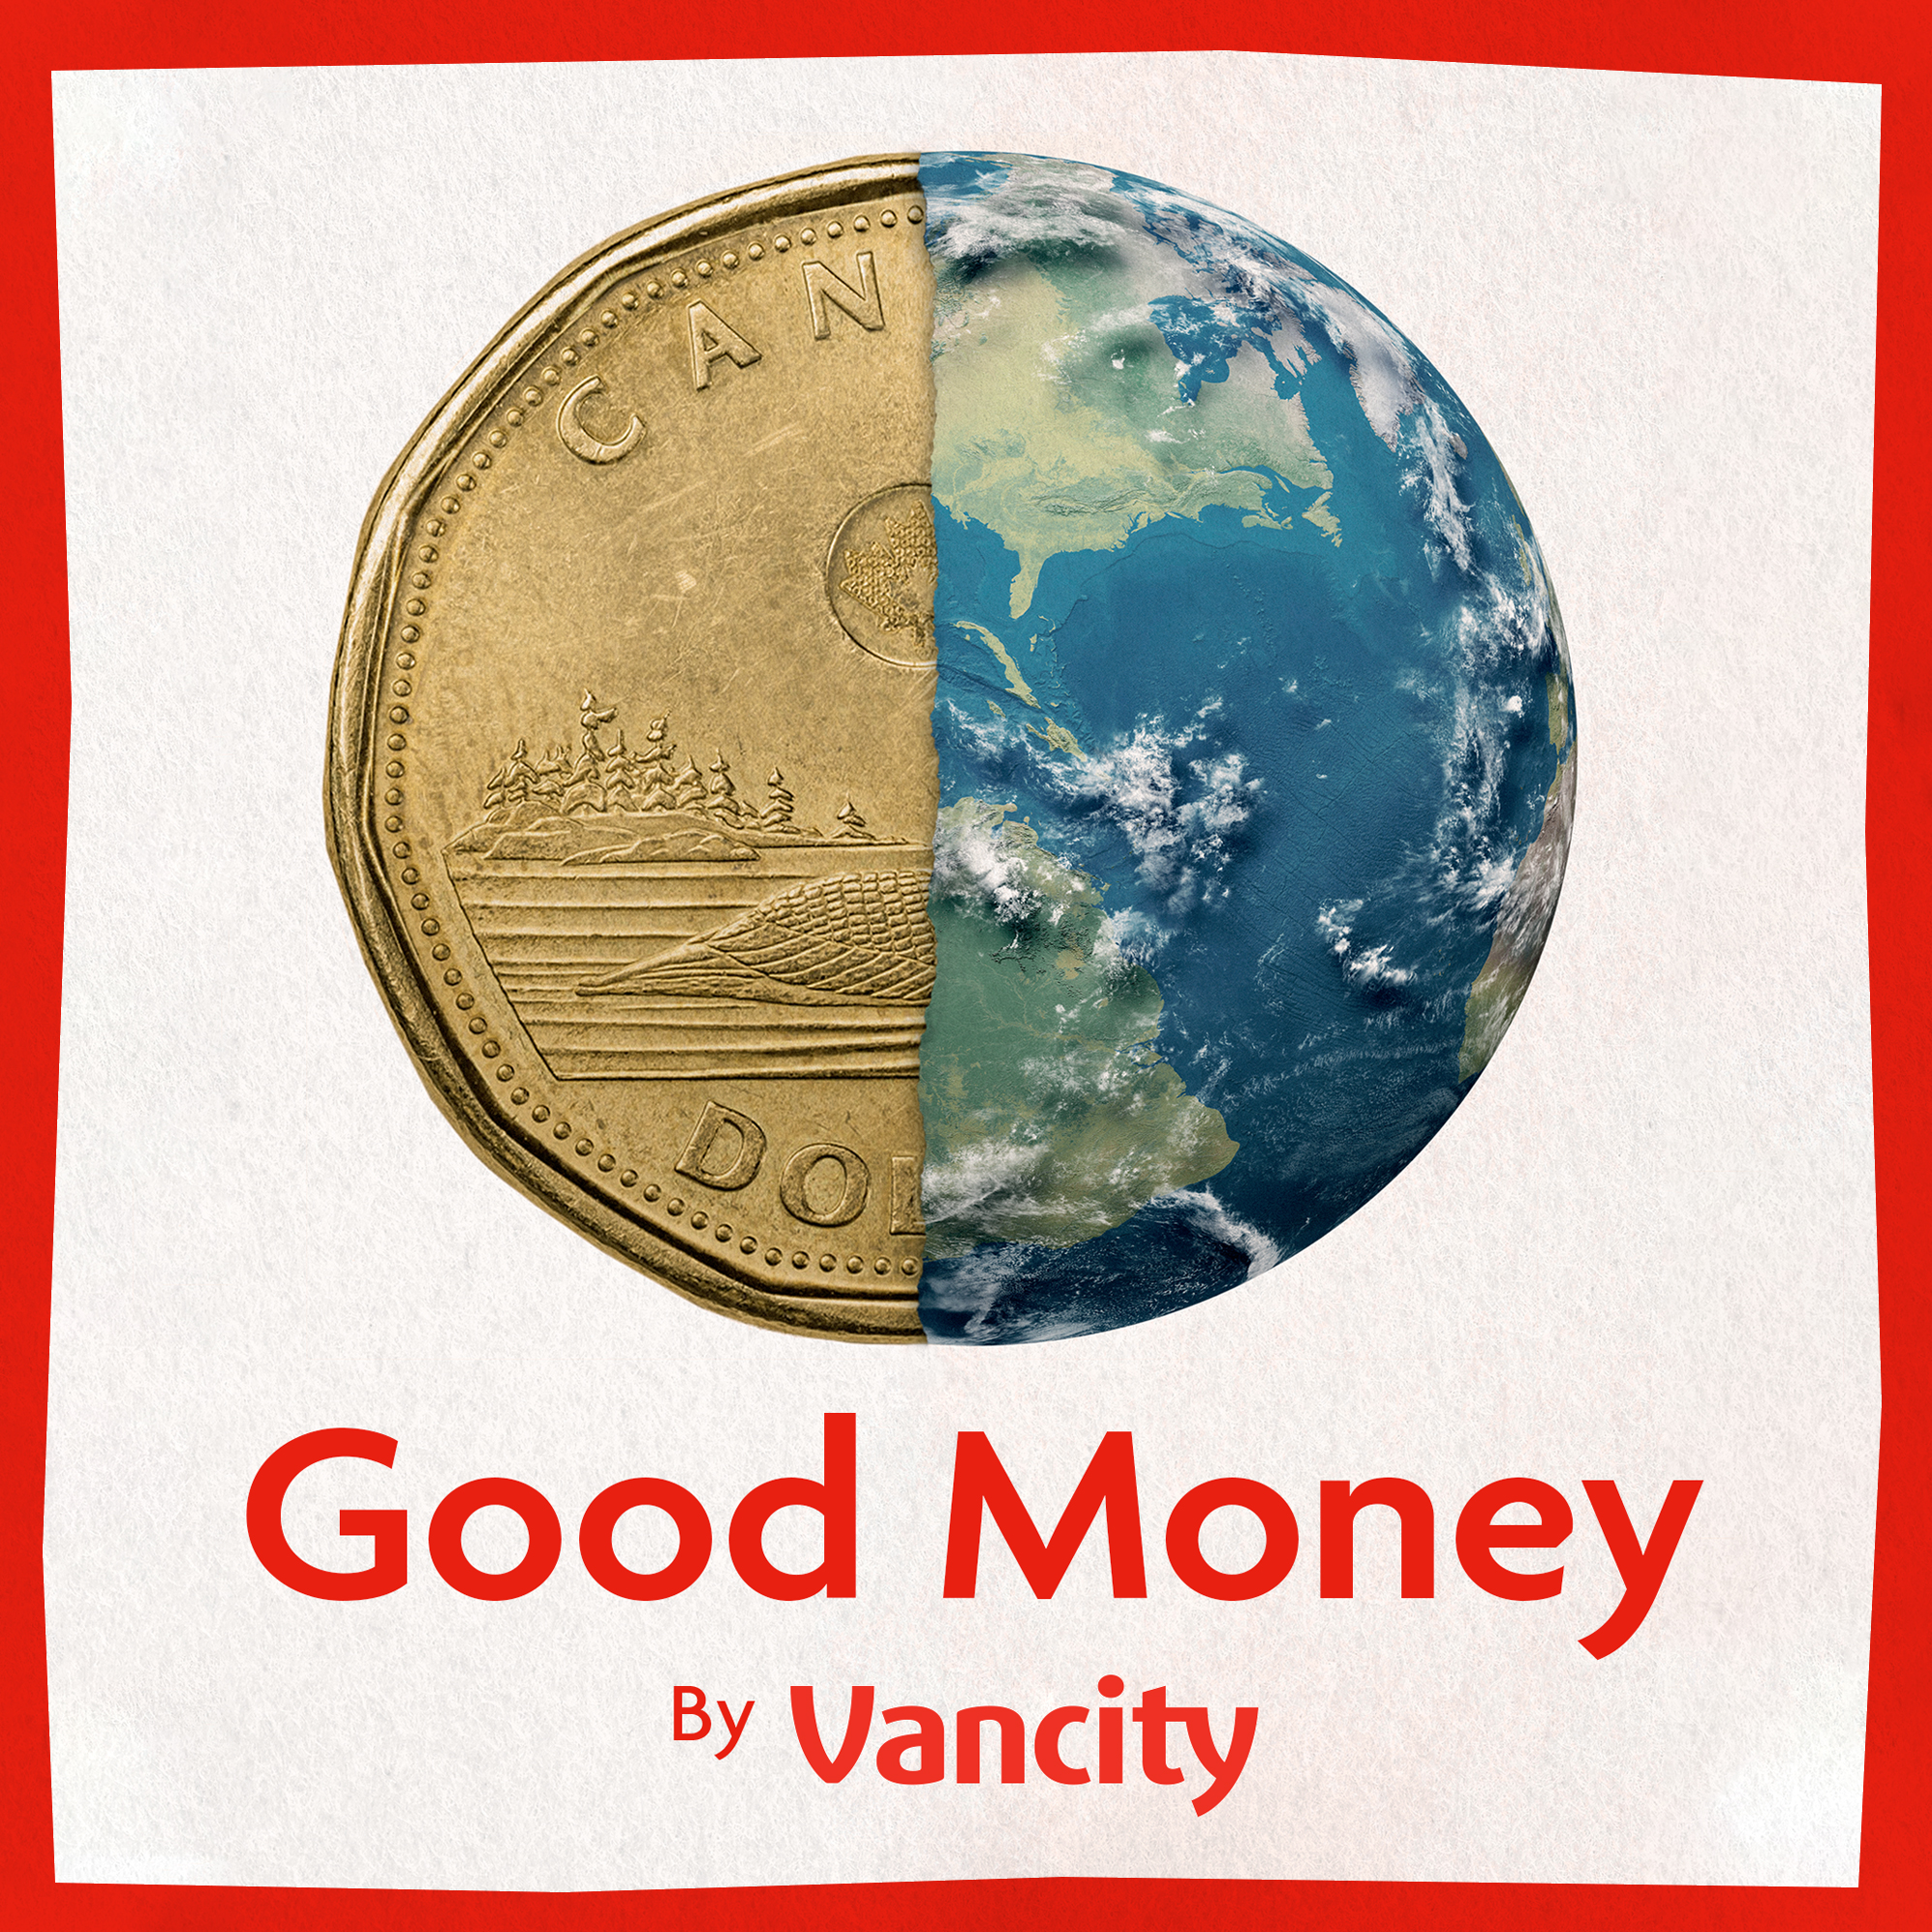 Welcome to Good Money